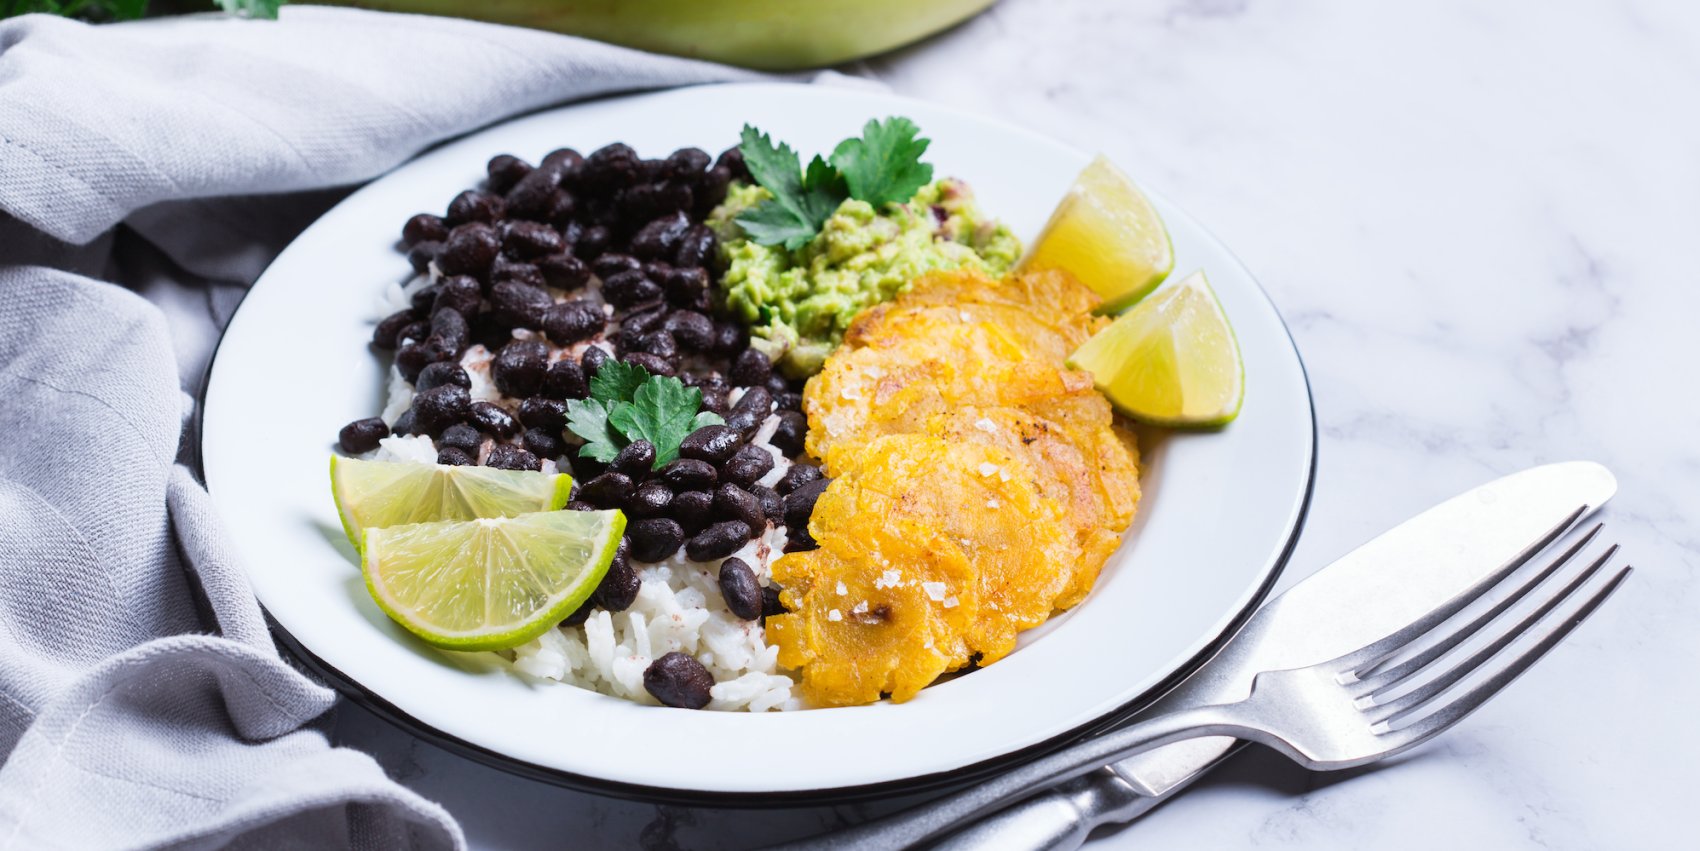 A vegetarian dish consisting of rice, beans, guacamole, plantains, and lime on a white plate